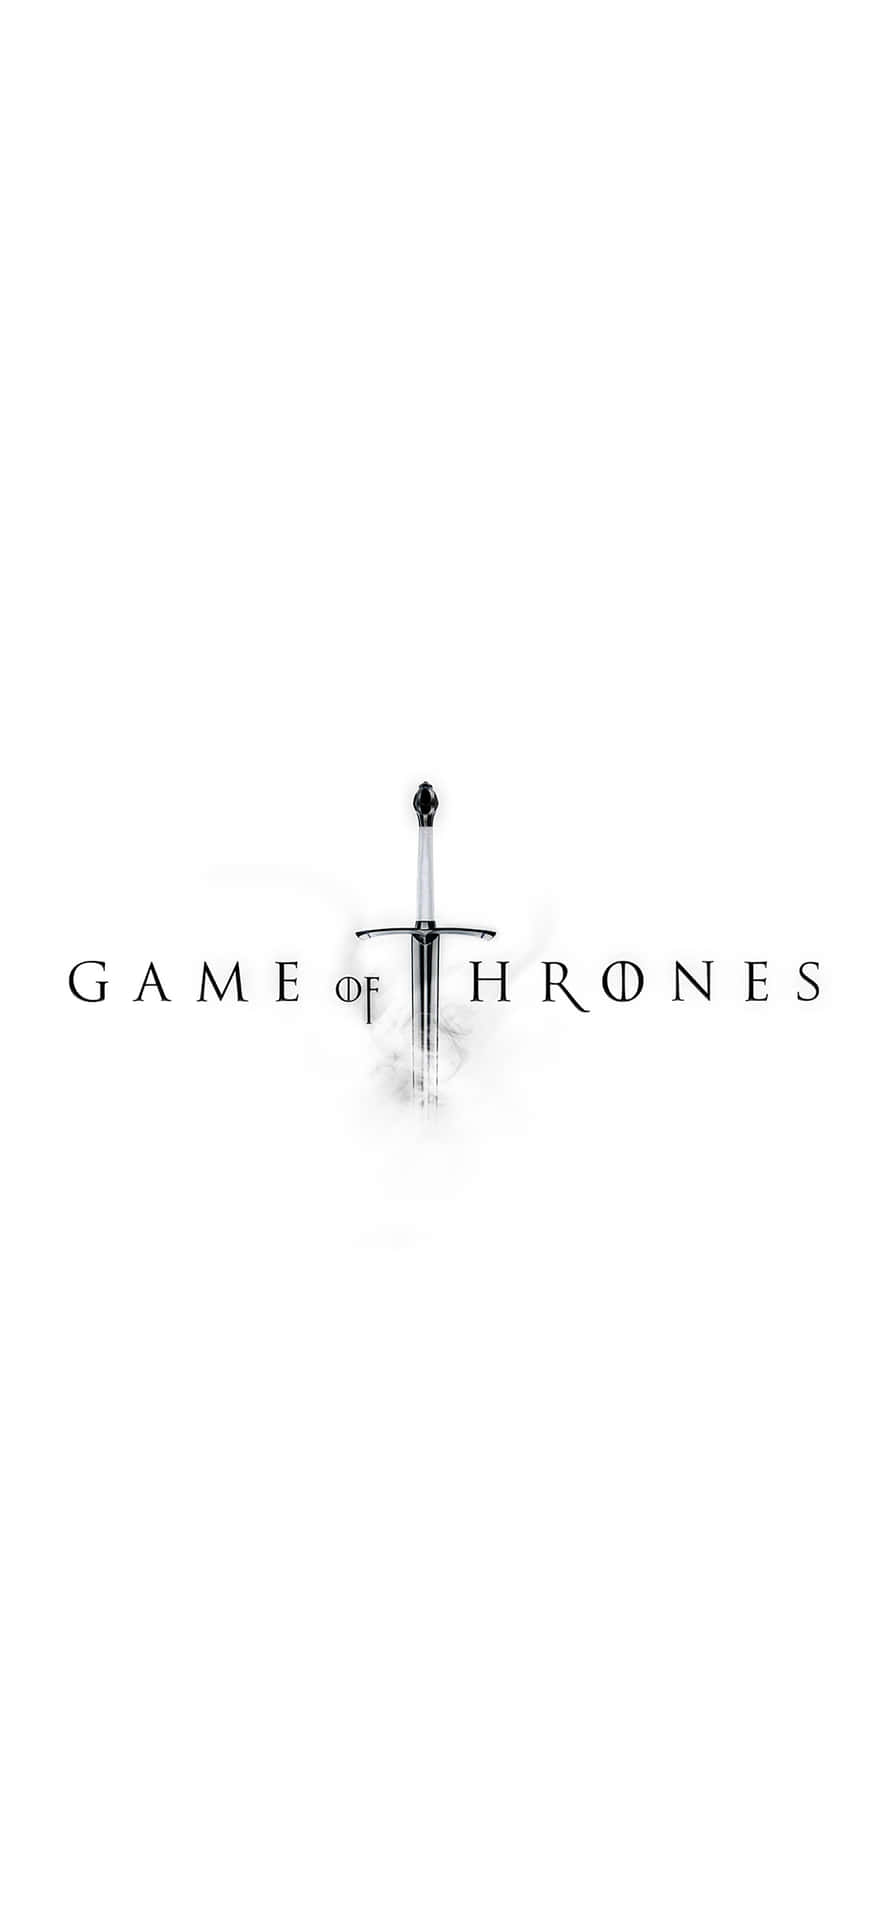 Stay up to date on all of Game Of Thrones news with the new Iphone! Wallpaper